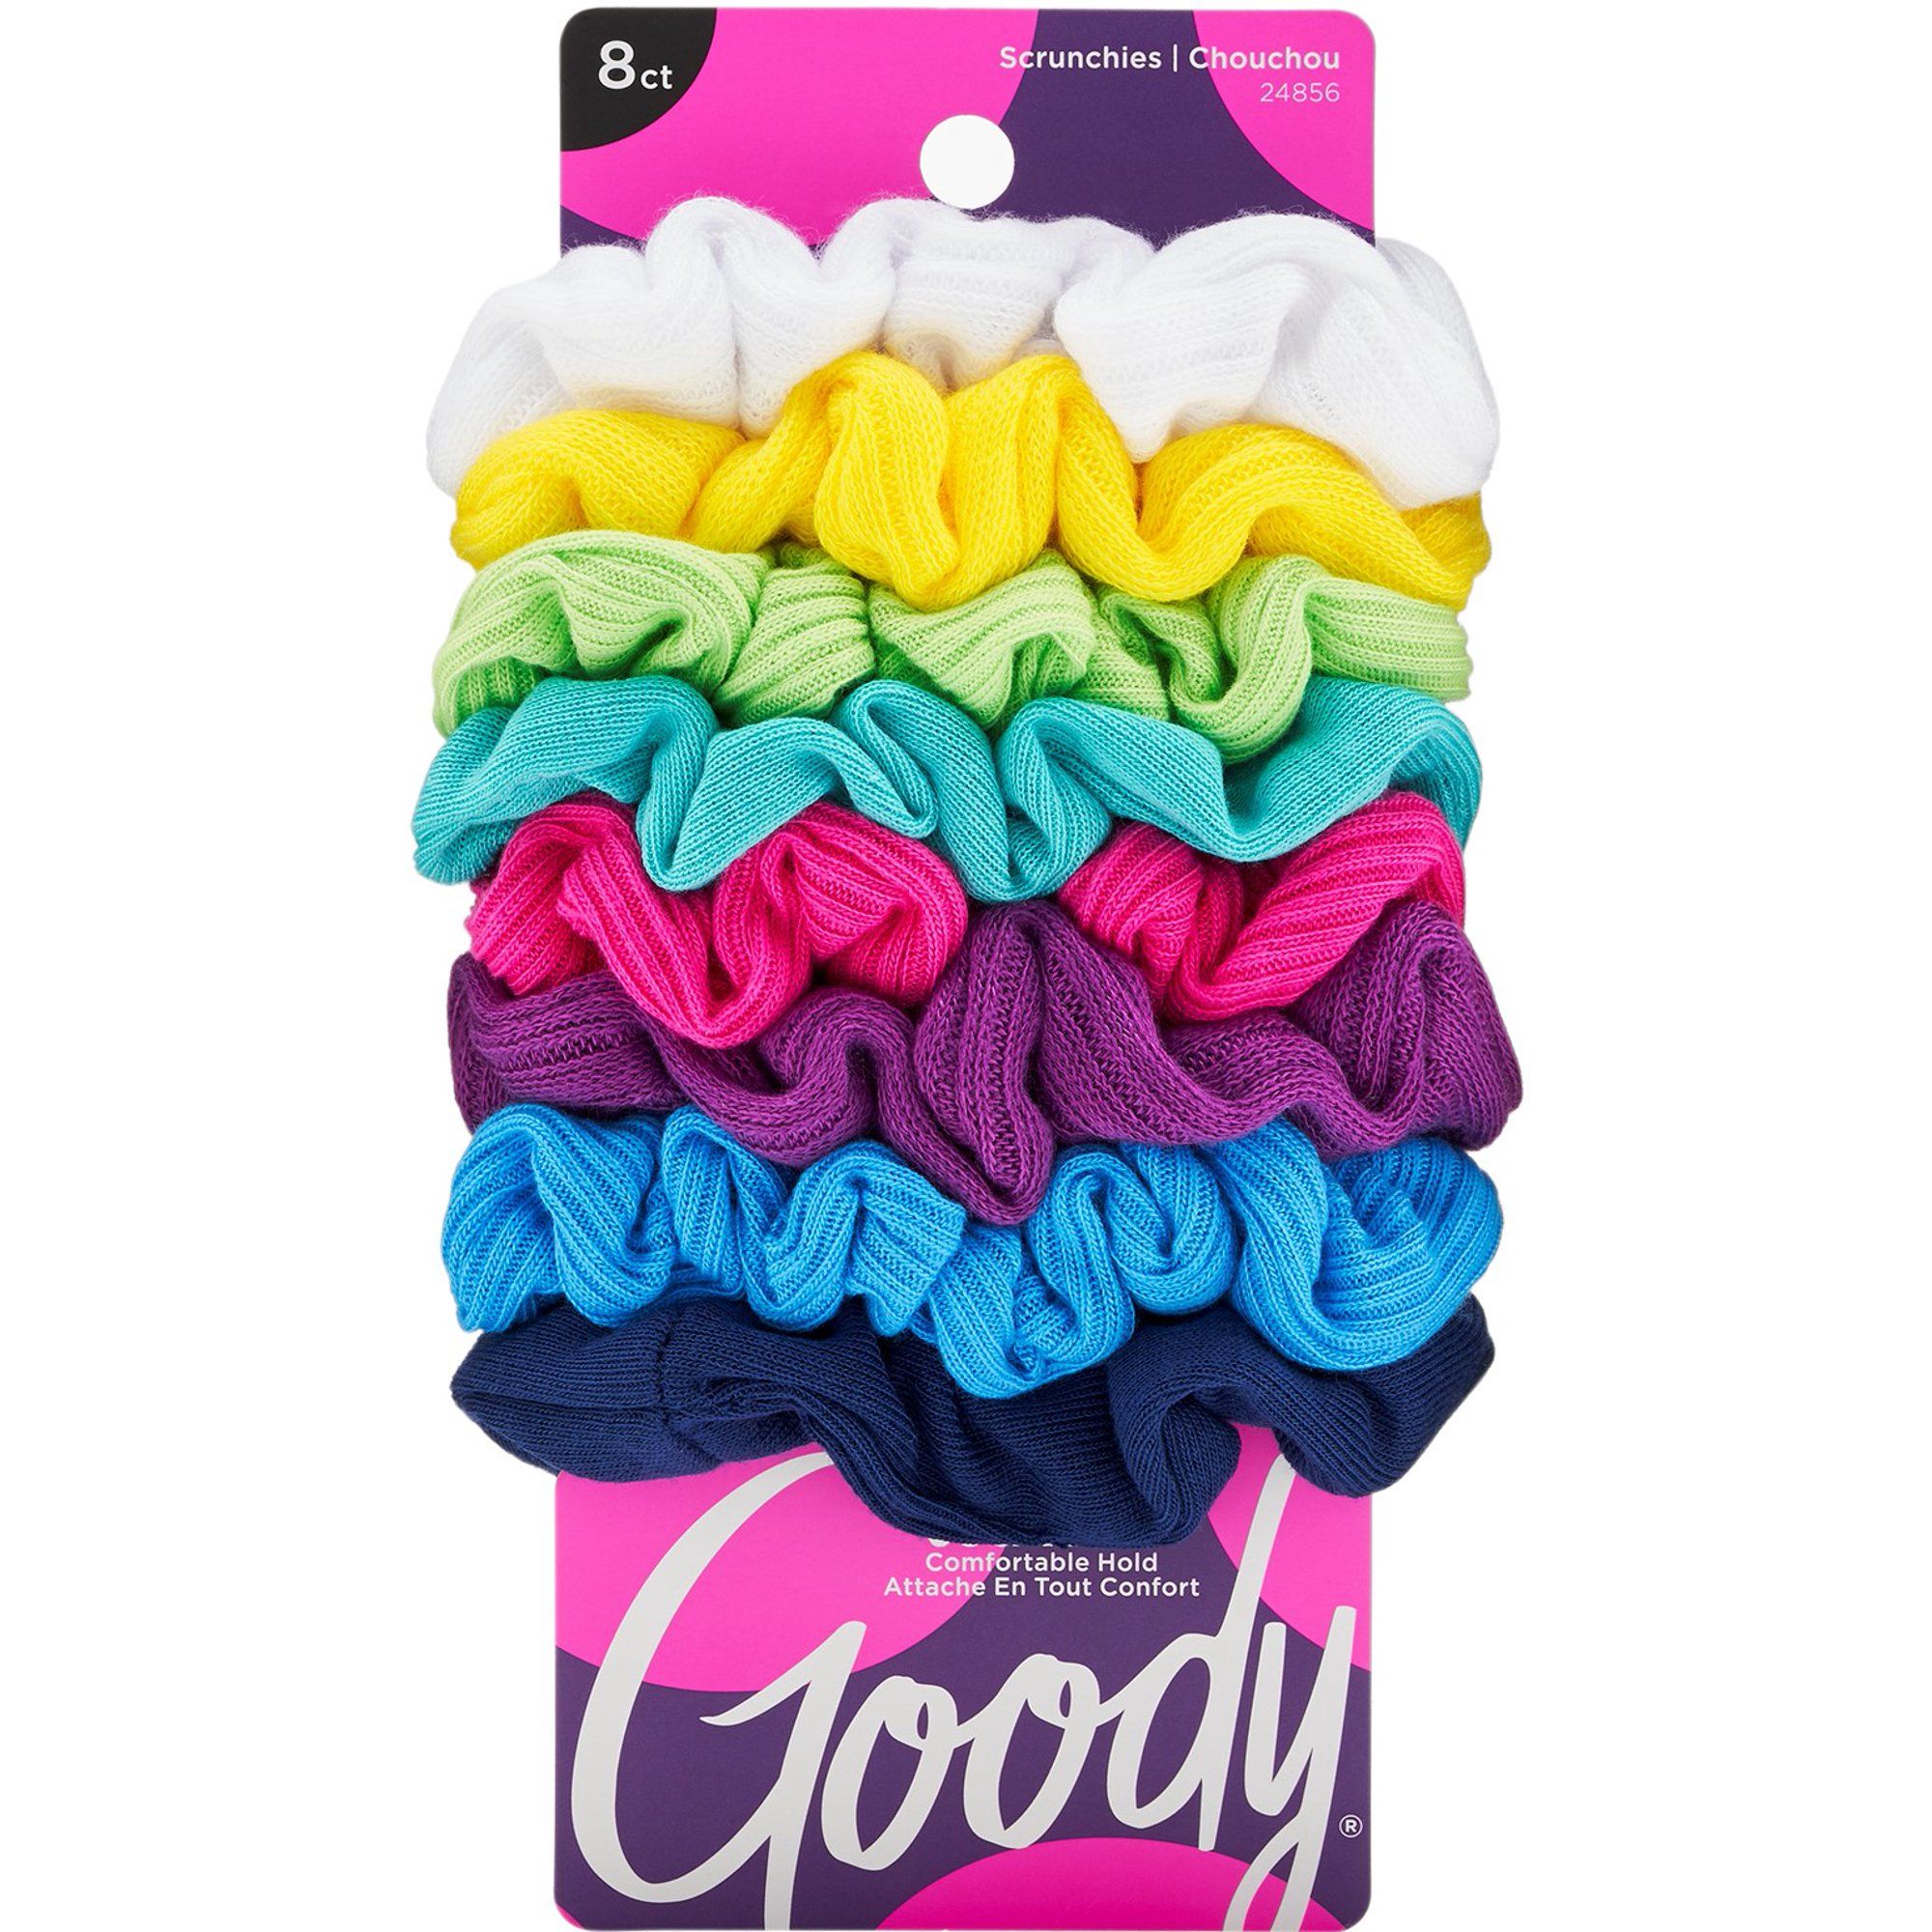 Goody Ouchless Scrunchies, Gentle Hair Scrunchies, Neon Lights, 8 Ct | Walmart (US)